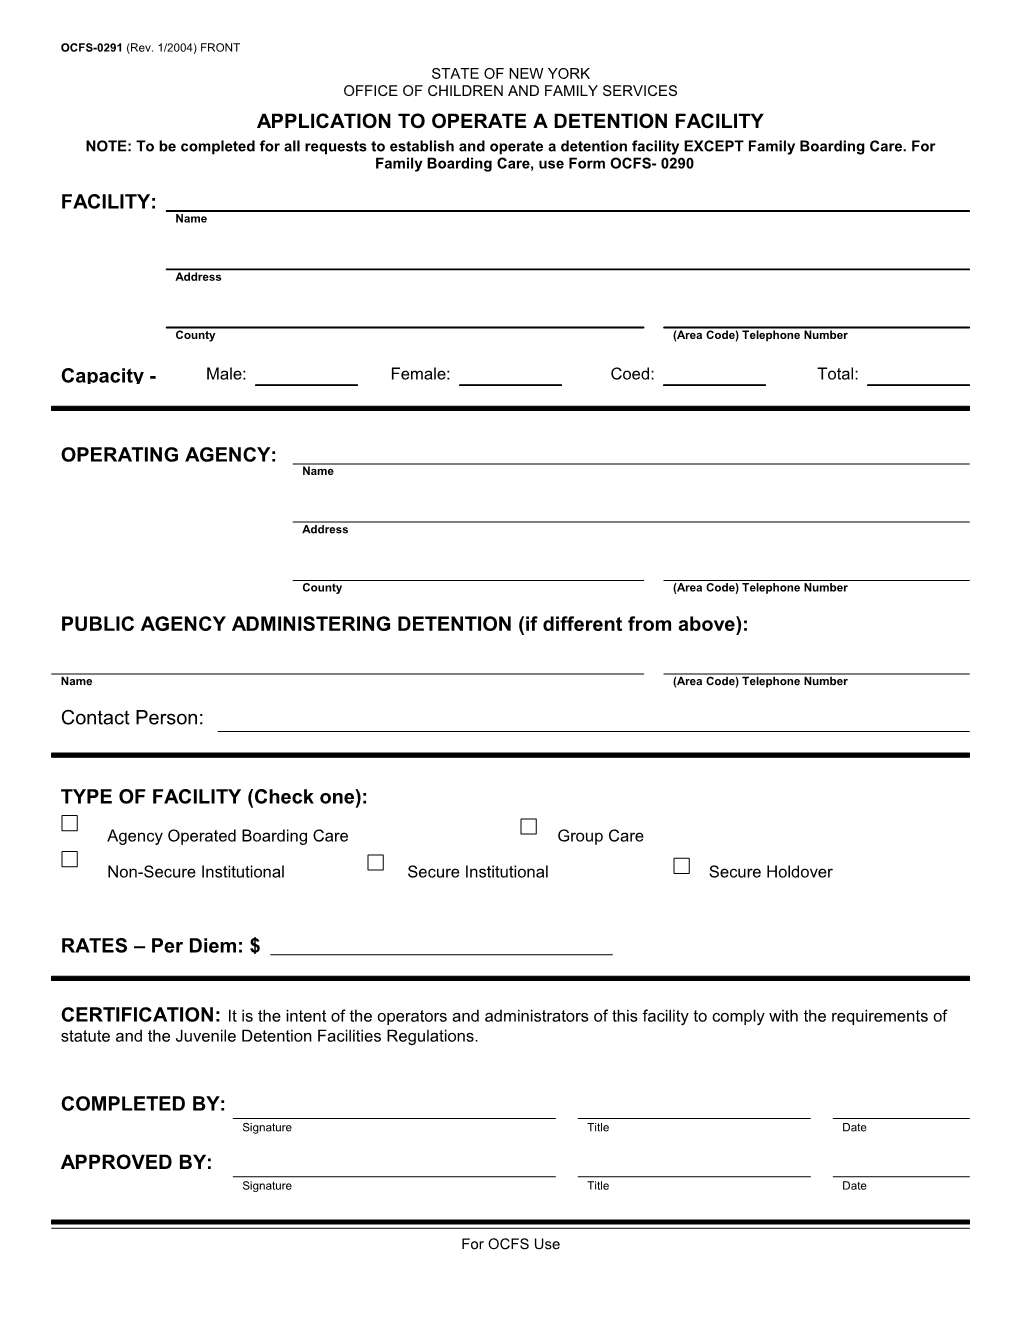 OCFS- 0291 Application to Operate a Detention Facility